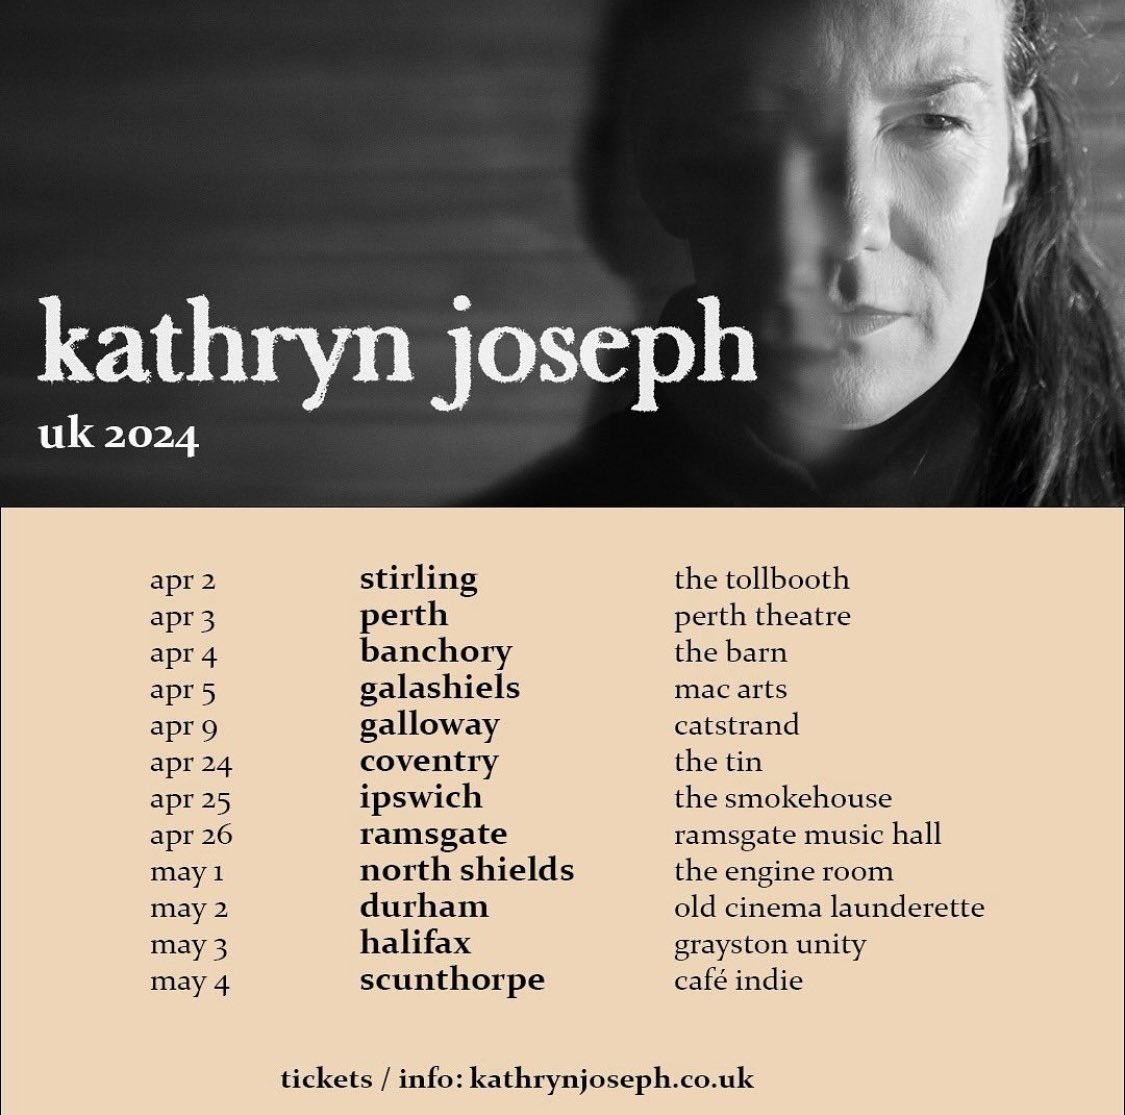 old filthy angry lady witch tour scottish section starts tomorrow. please let me lure you with beautiful boys. @RickRedbeard @inthedarkarcade @tweetsiiga @billyfrabbit @sludge___puppy we would love to make you come and thank you for. 🤍 kathrynjoseph.co.uk